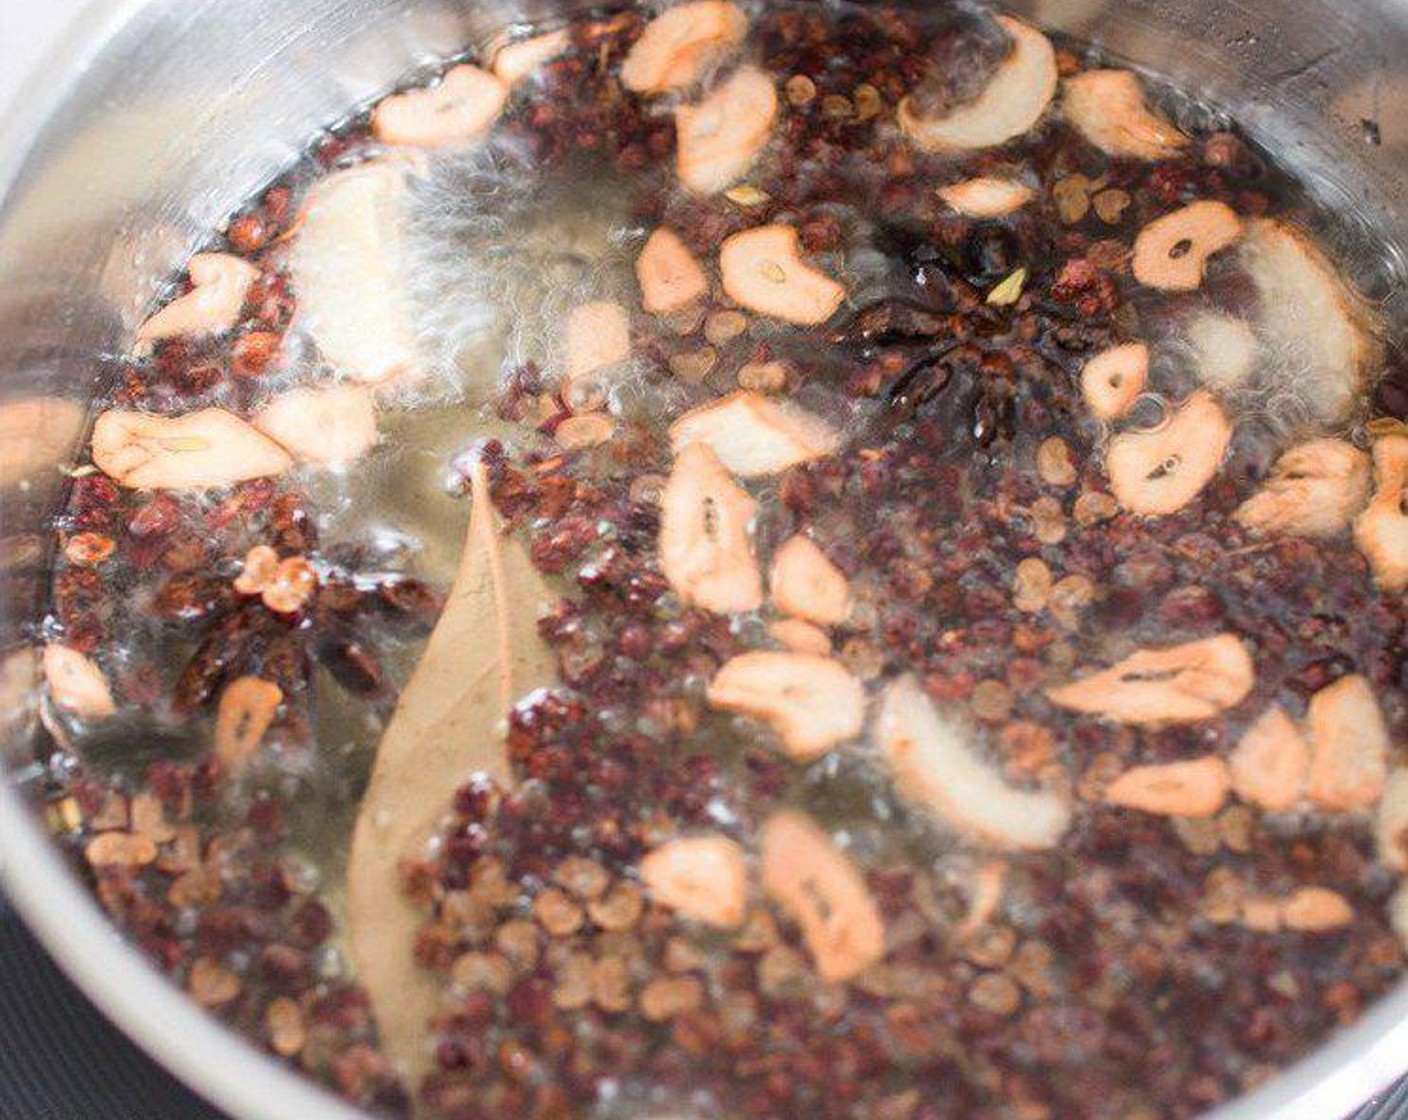 step 2 Heat the Oil (9 oz) in a saucepan over medium heat, add in Sichuan Peppercorns (1 Tbsp), Bay Leaf (1), Star Anise (2), Garlic (2 cloves), and Fresh Ginger (1 1/4 tsp) into the oil. Heat until the garlic turns golden in colour, that normally takes 3 to 4 minutes.
Remove the saucepan from the heat, set aside.